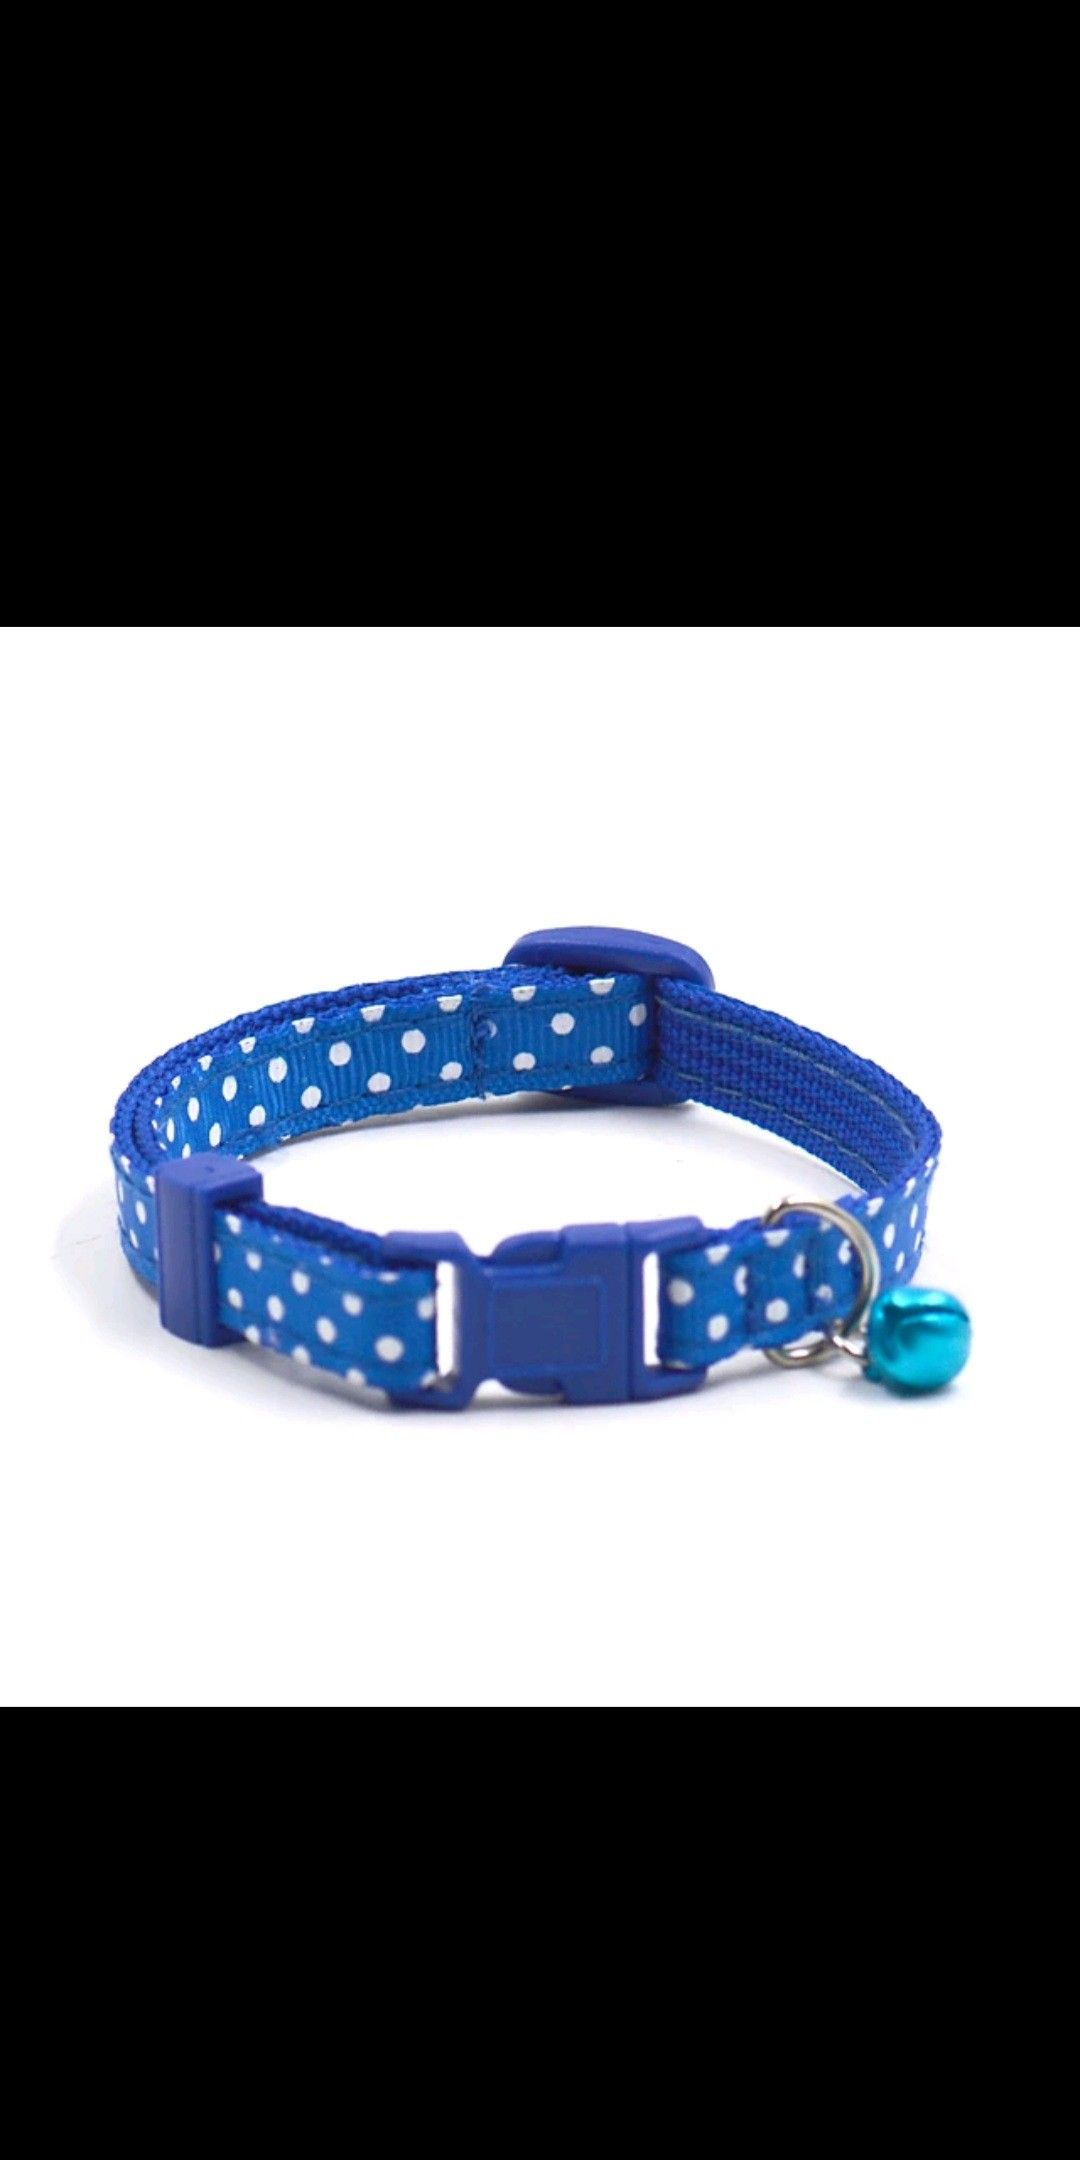 Small to medium dog or cat collars with GPS tracker